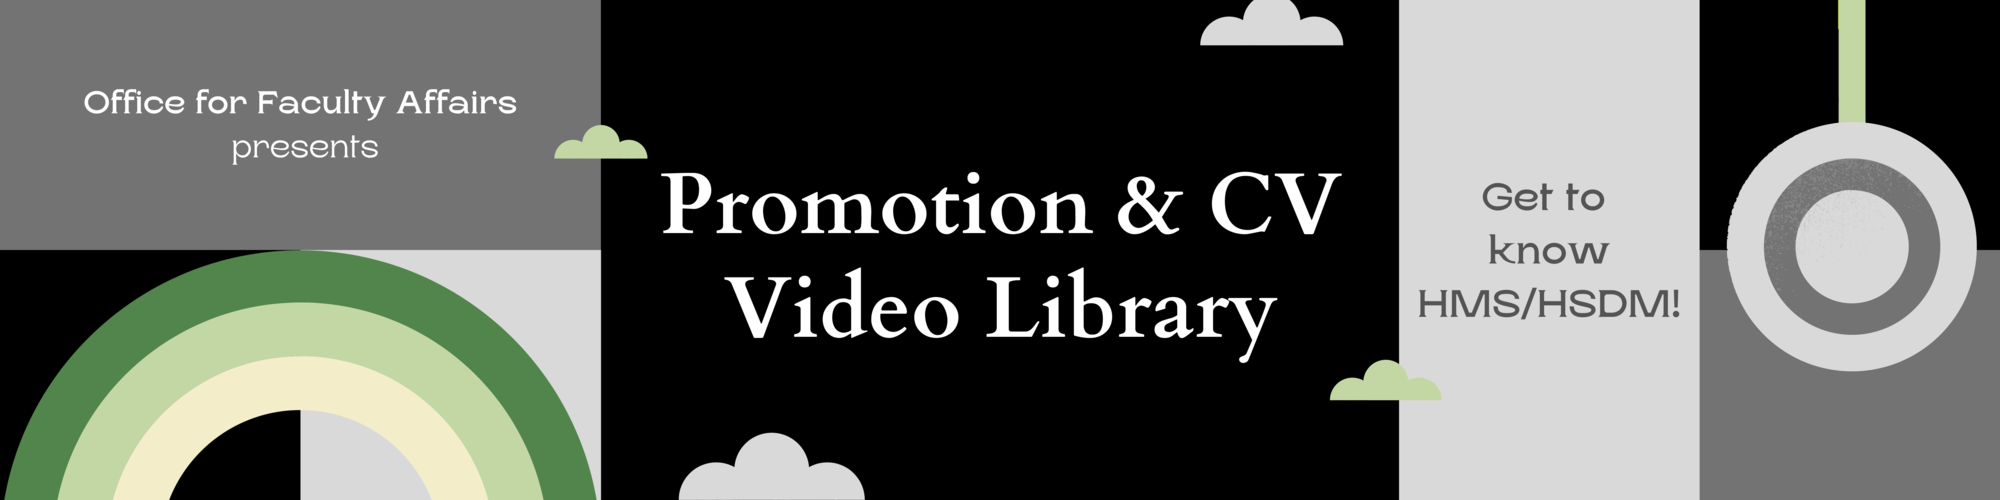 Banner Image: Promotion and CV Video Library